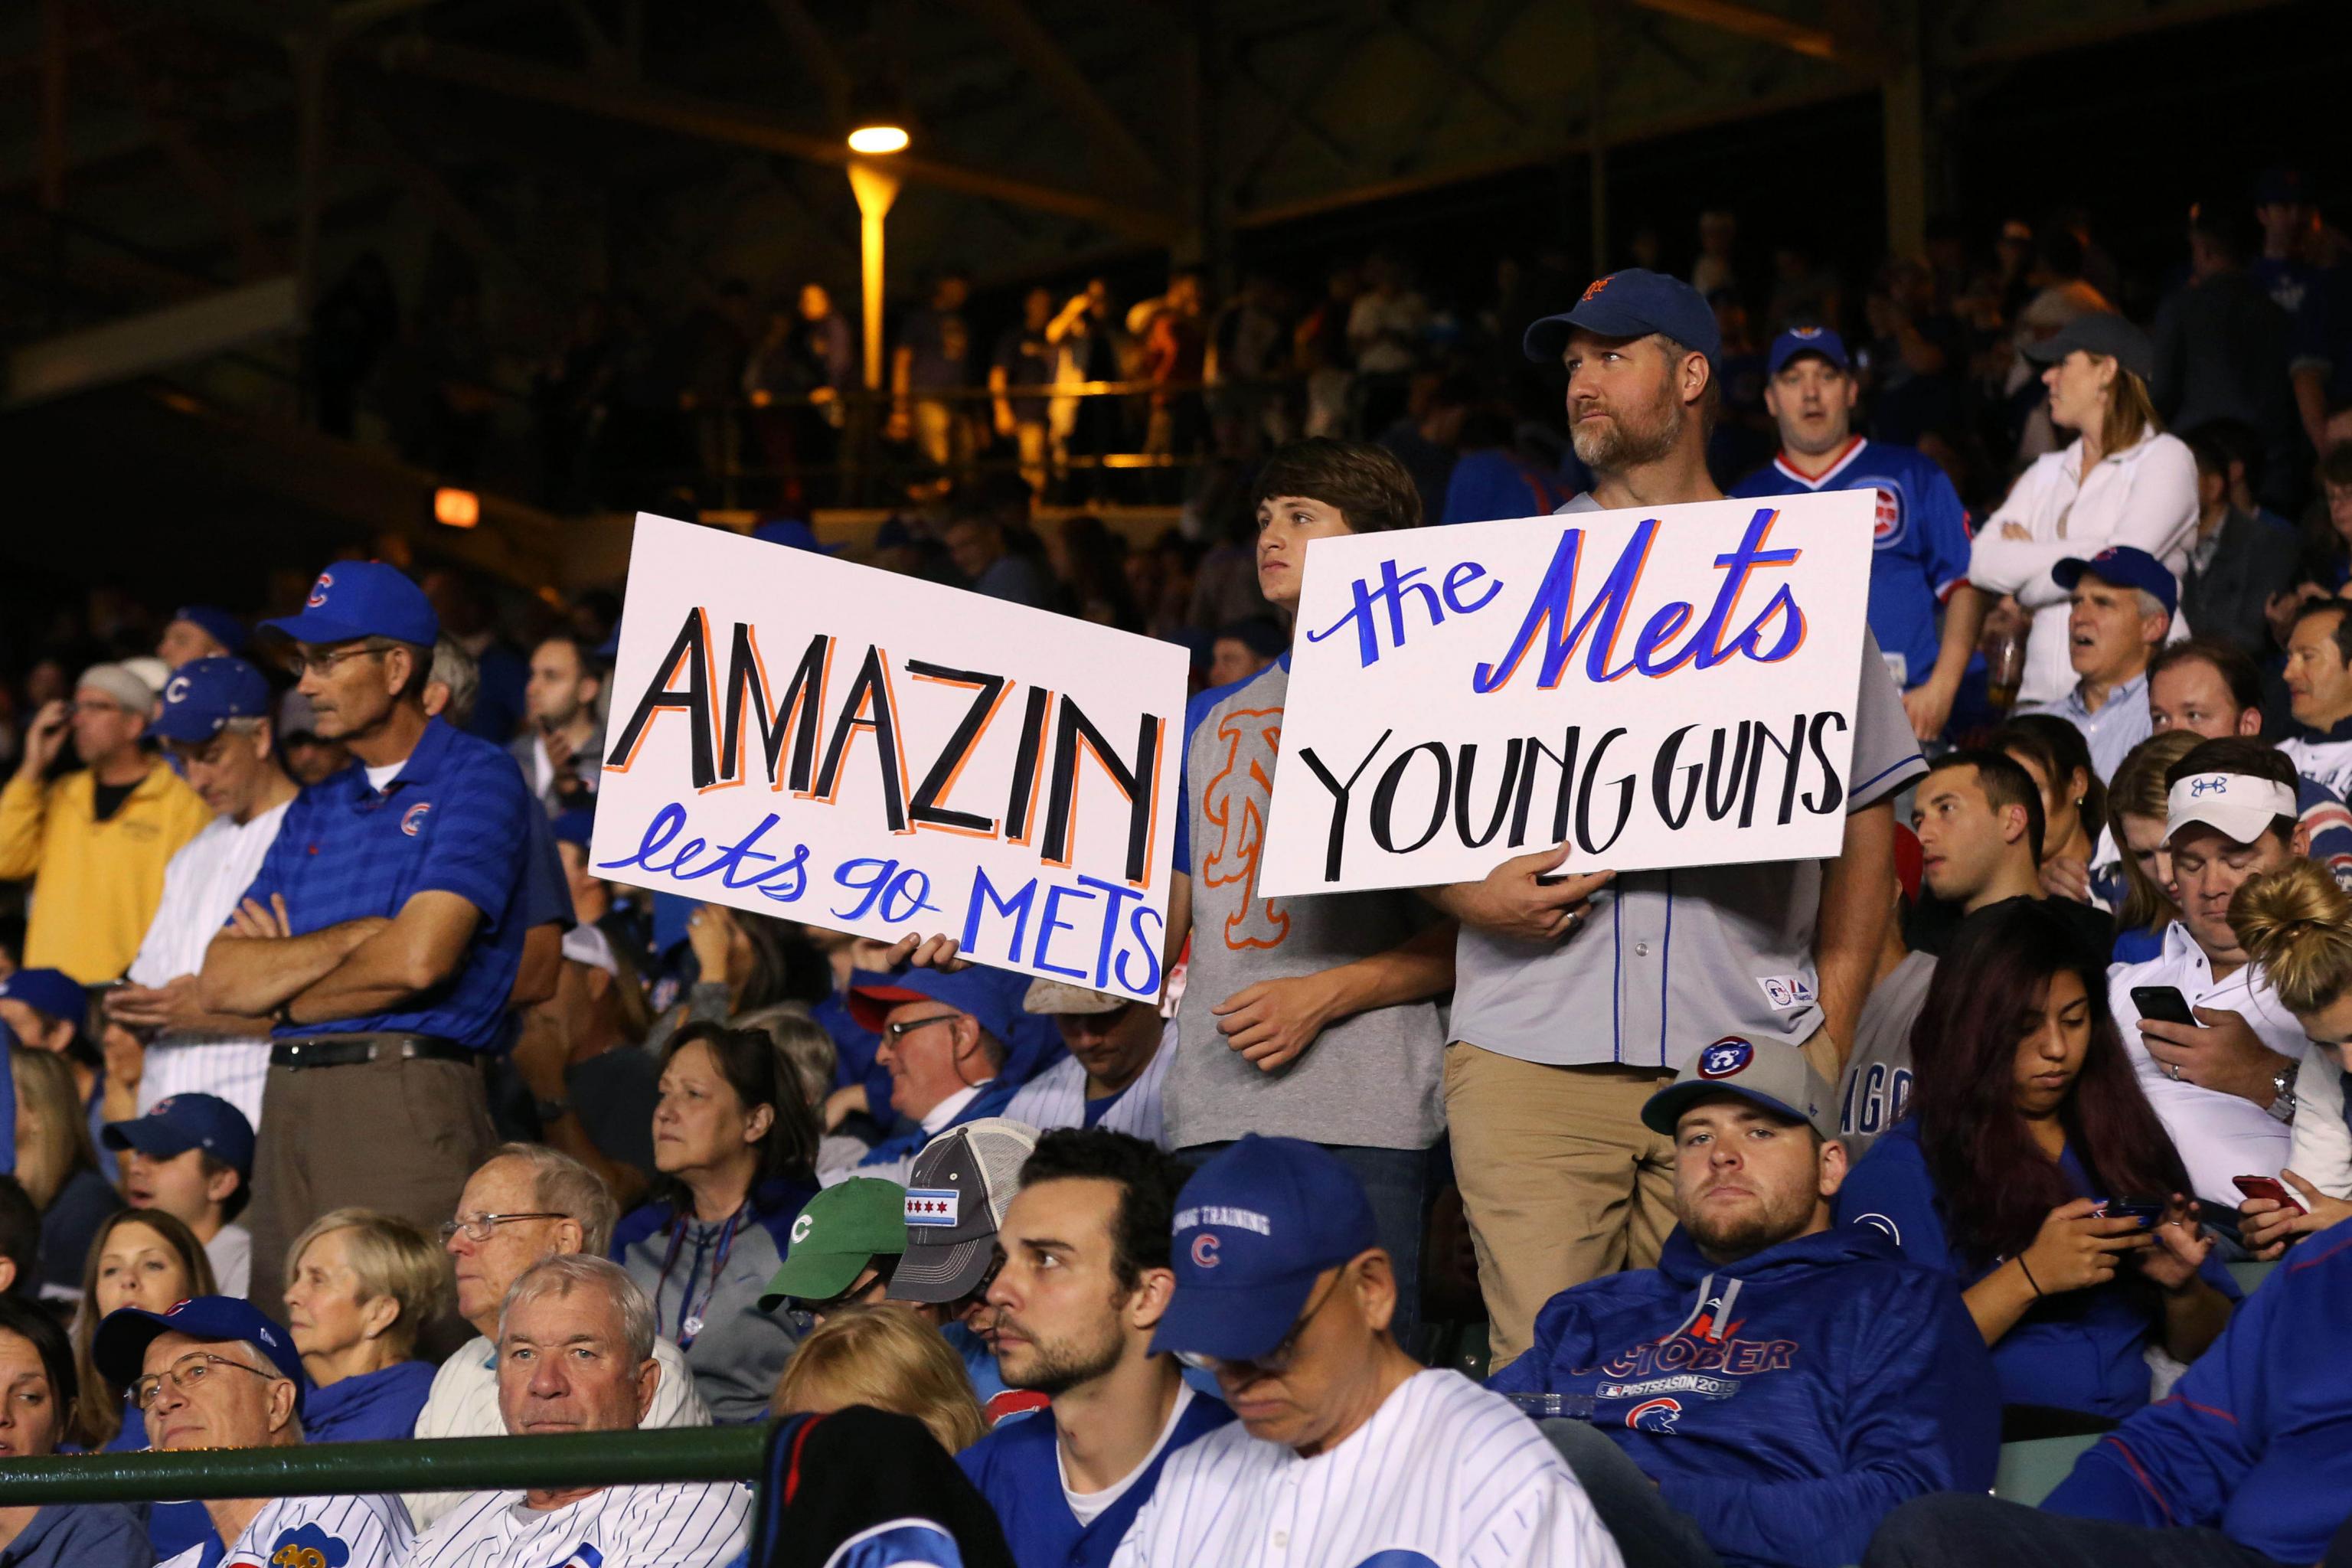 World Series 2015: Mets, Royals Announce Rosters for Fall Classic, News,  Scores, Highlights, Stats, and Rumors